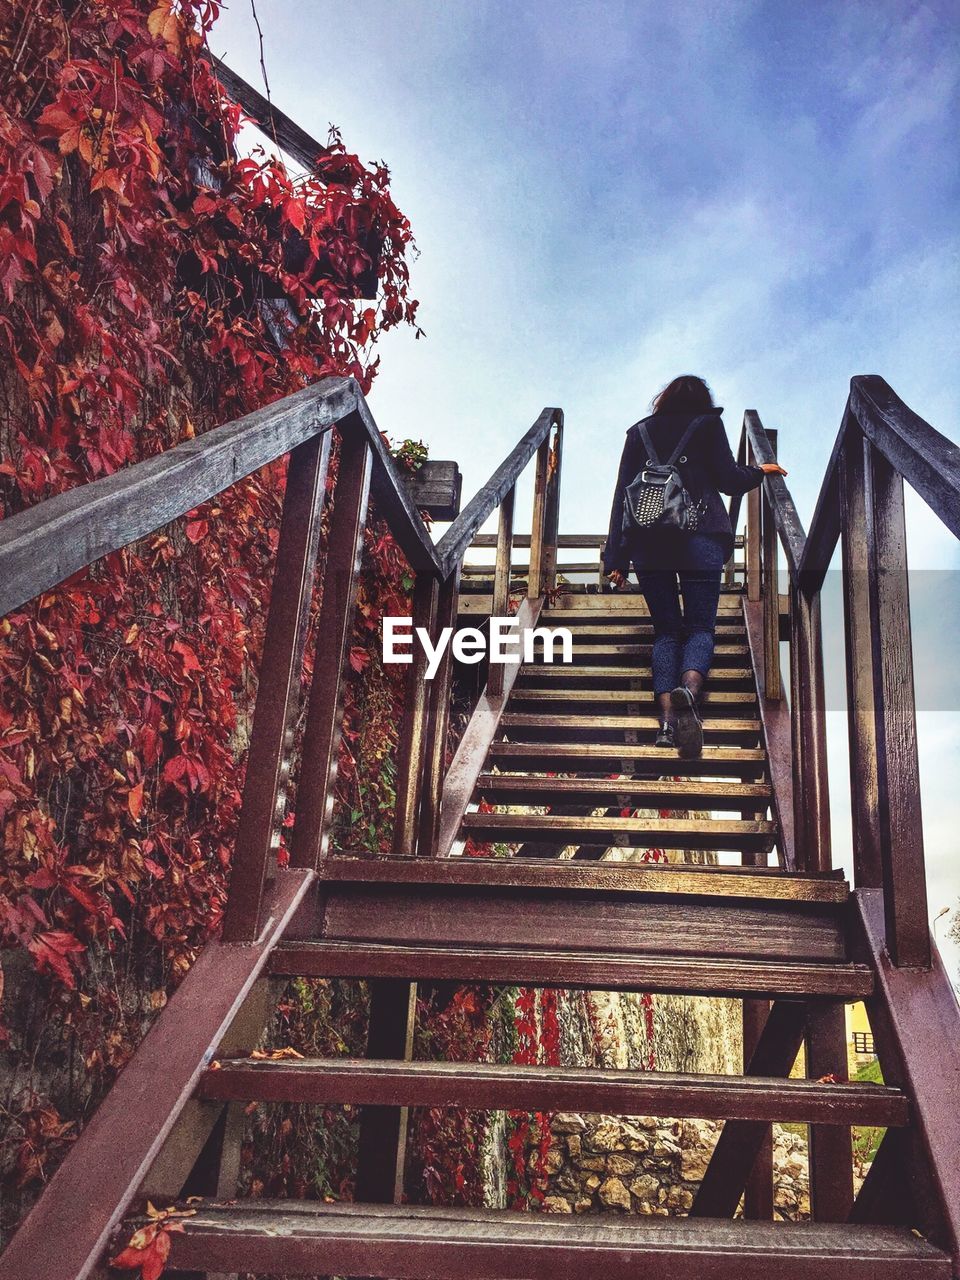 PEOPLE ON STAIRS